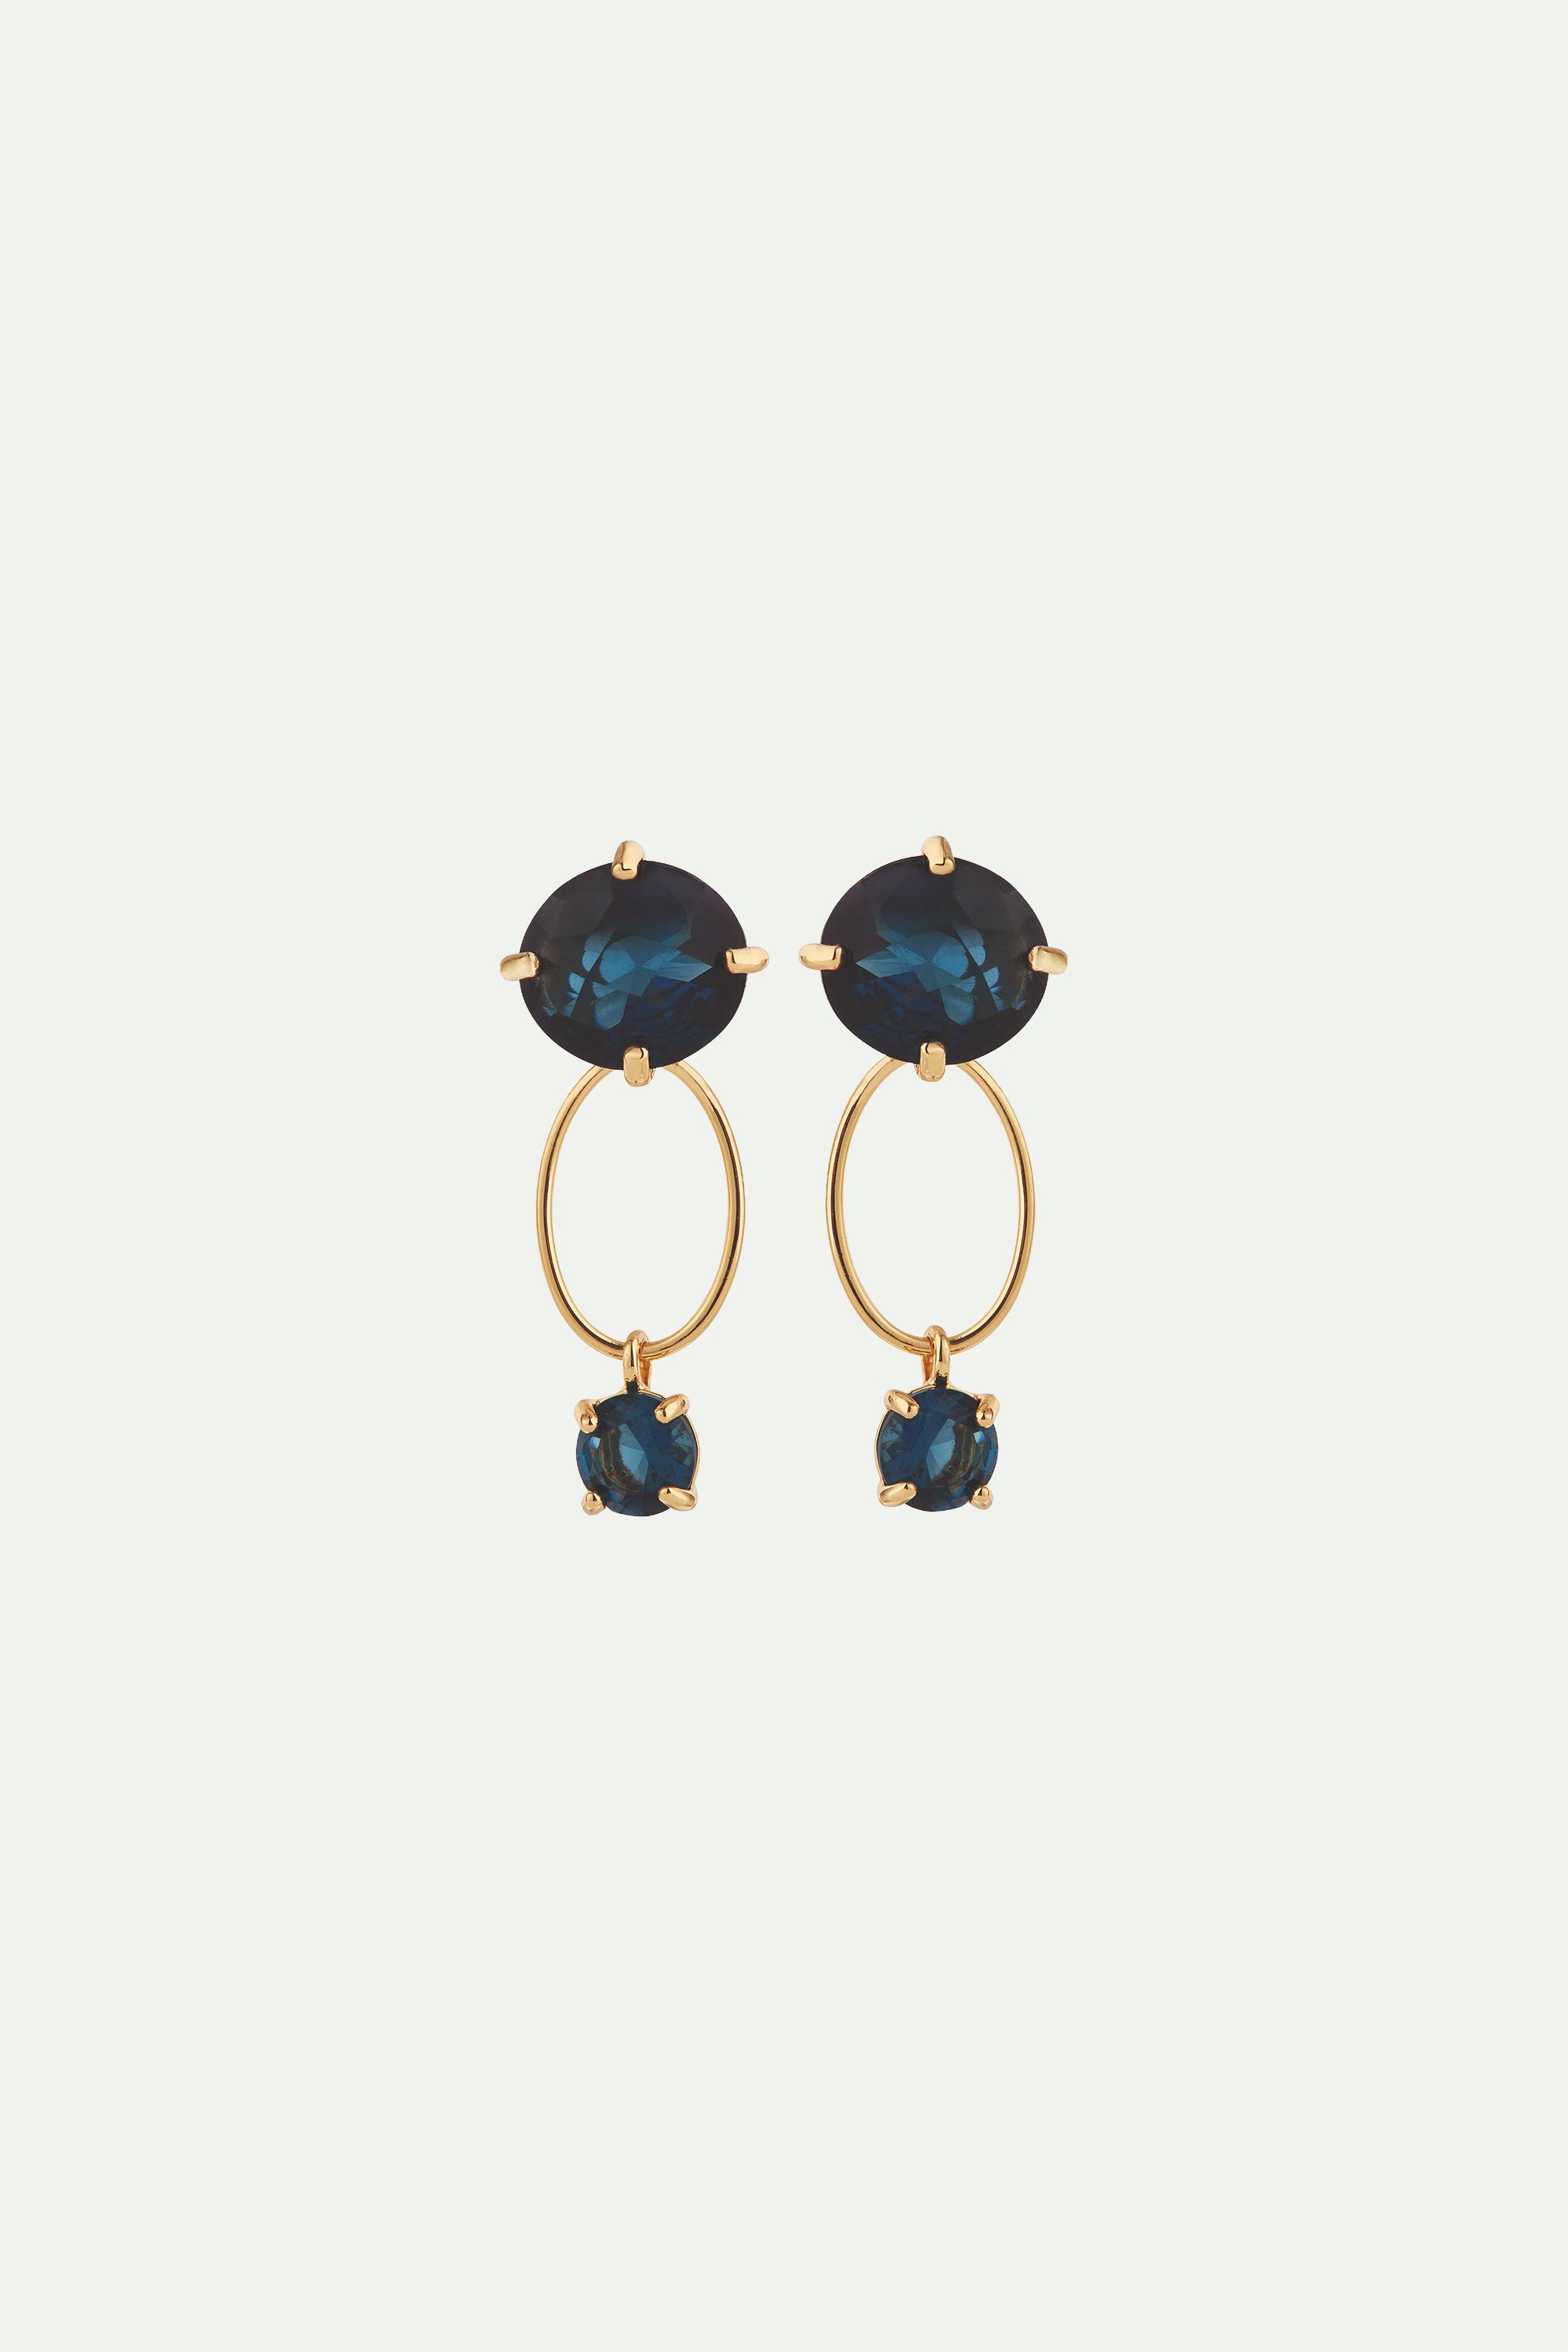 Ocean blue diamantine oval ring with round stone post earrings 